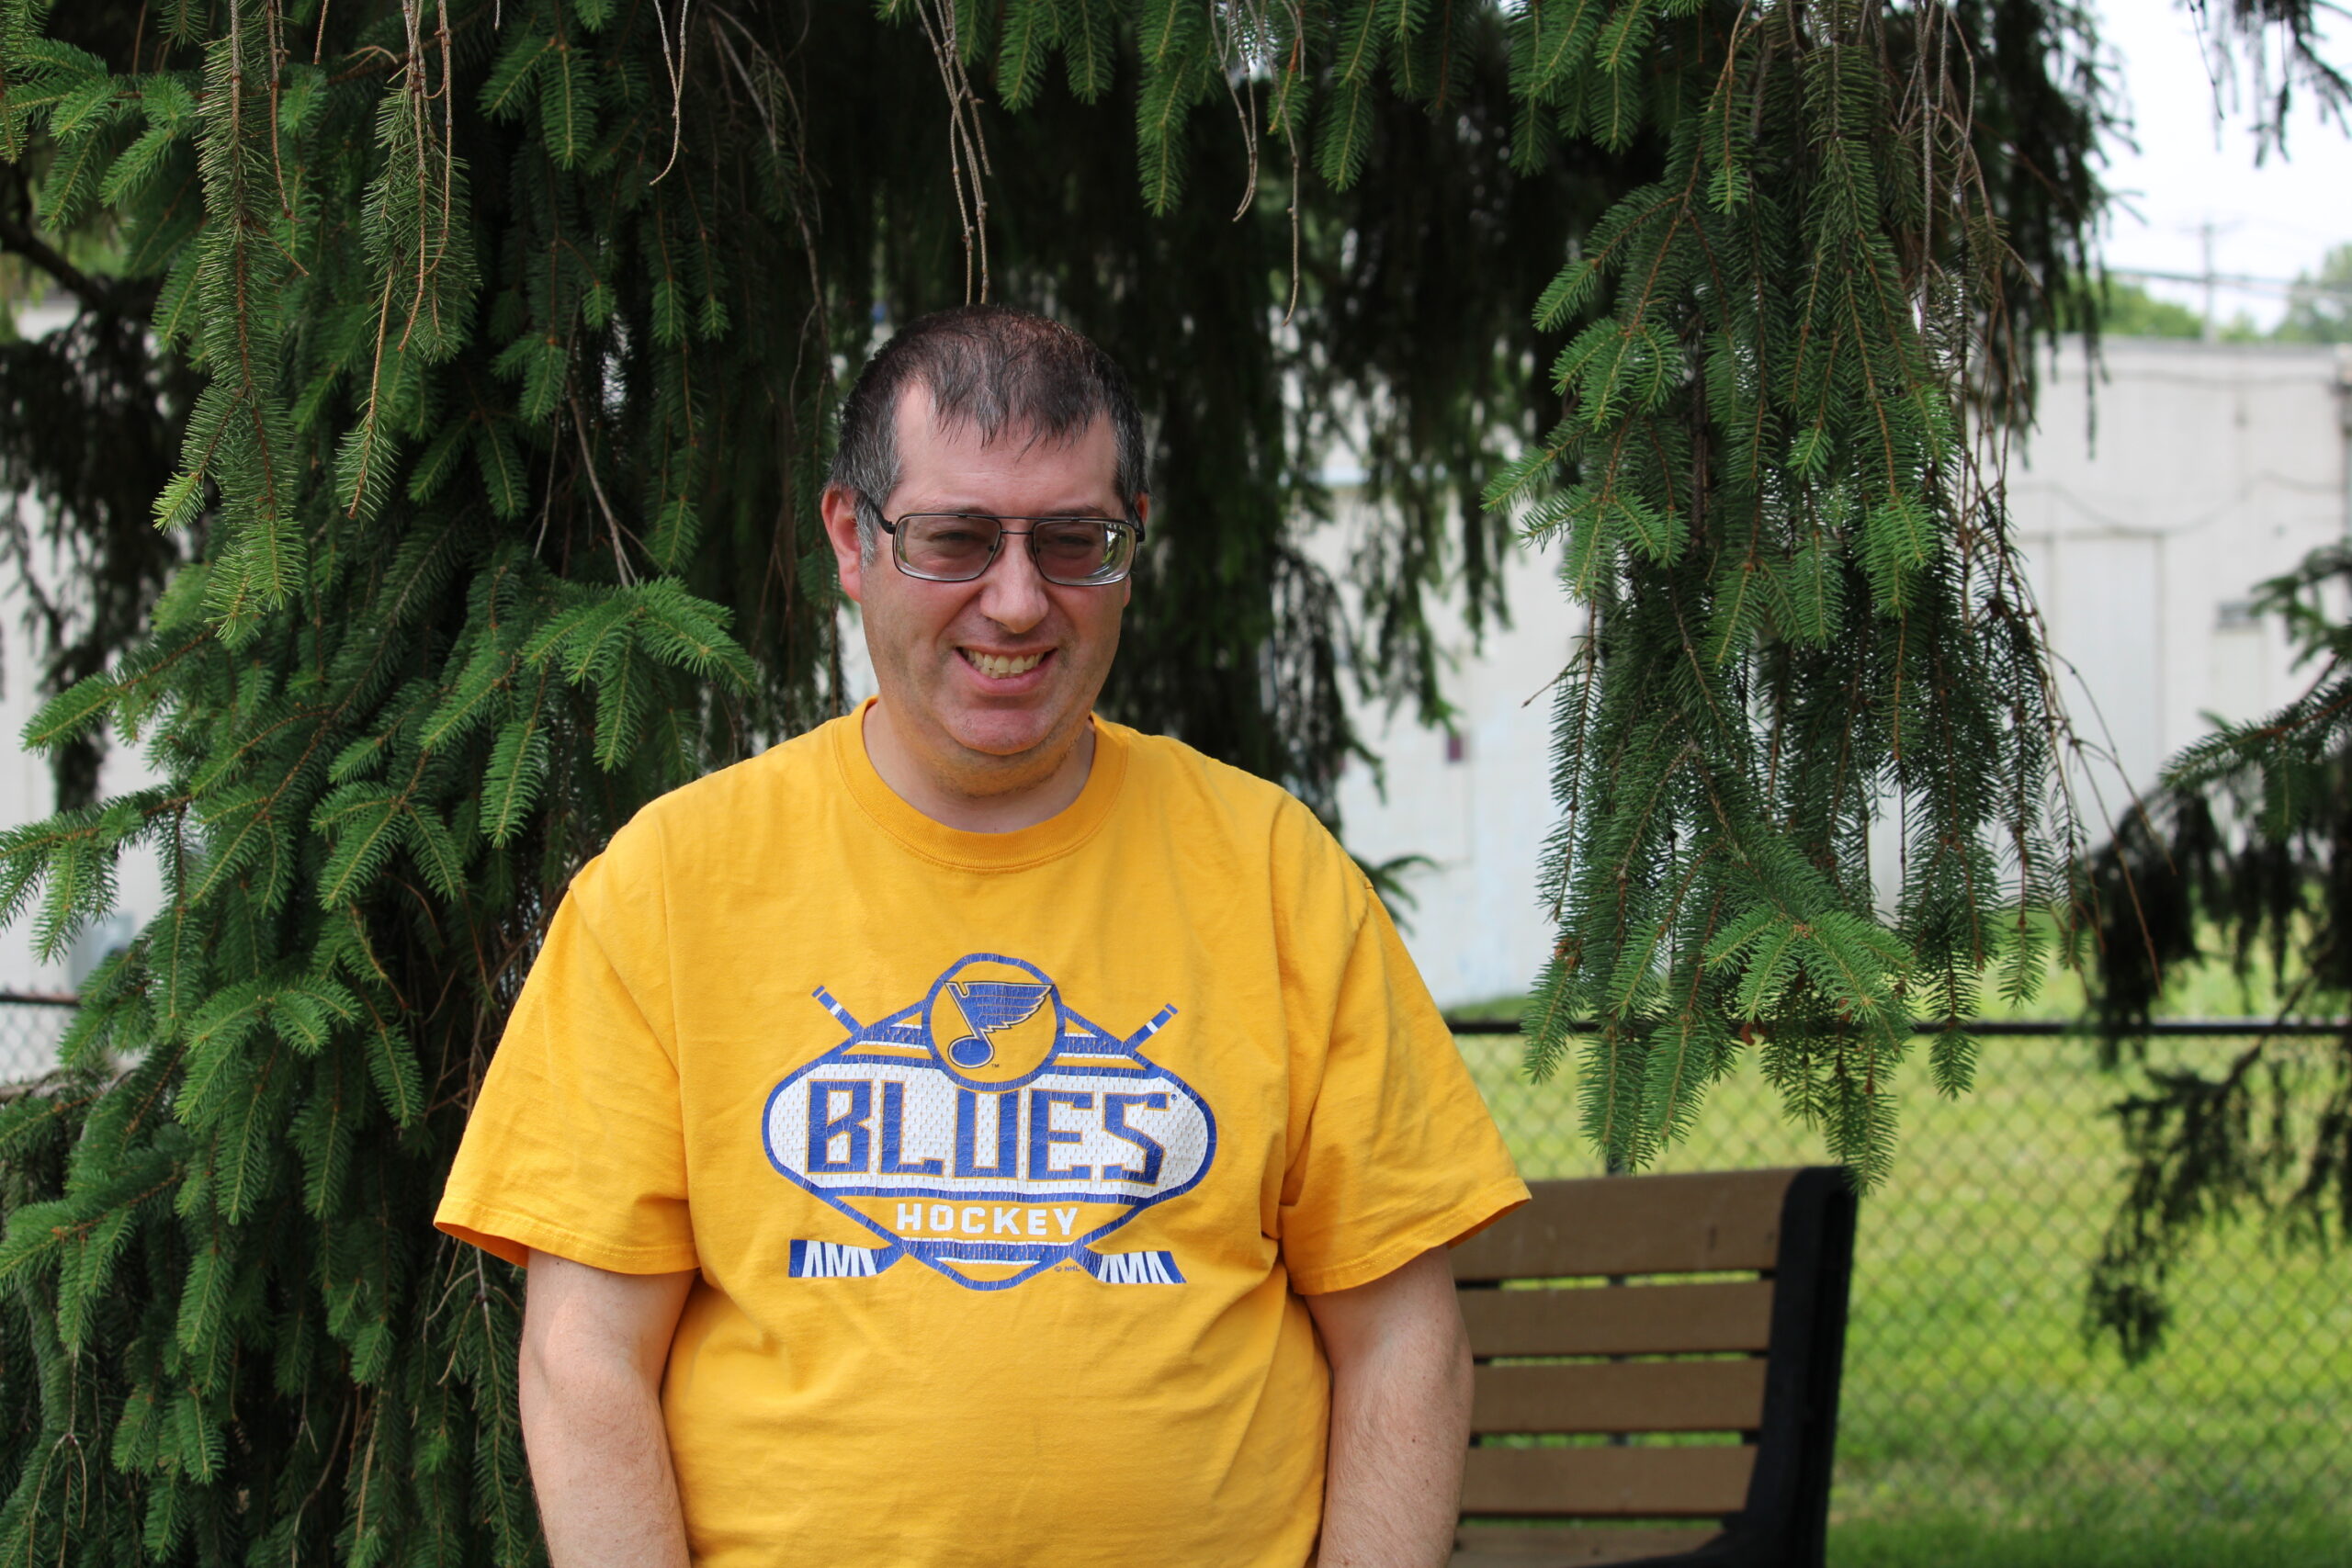 Chris wearing a St. Louis Blues shirt and standing by a tree